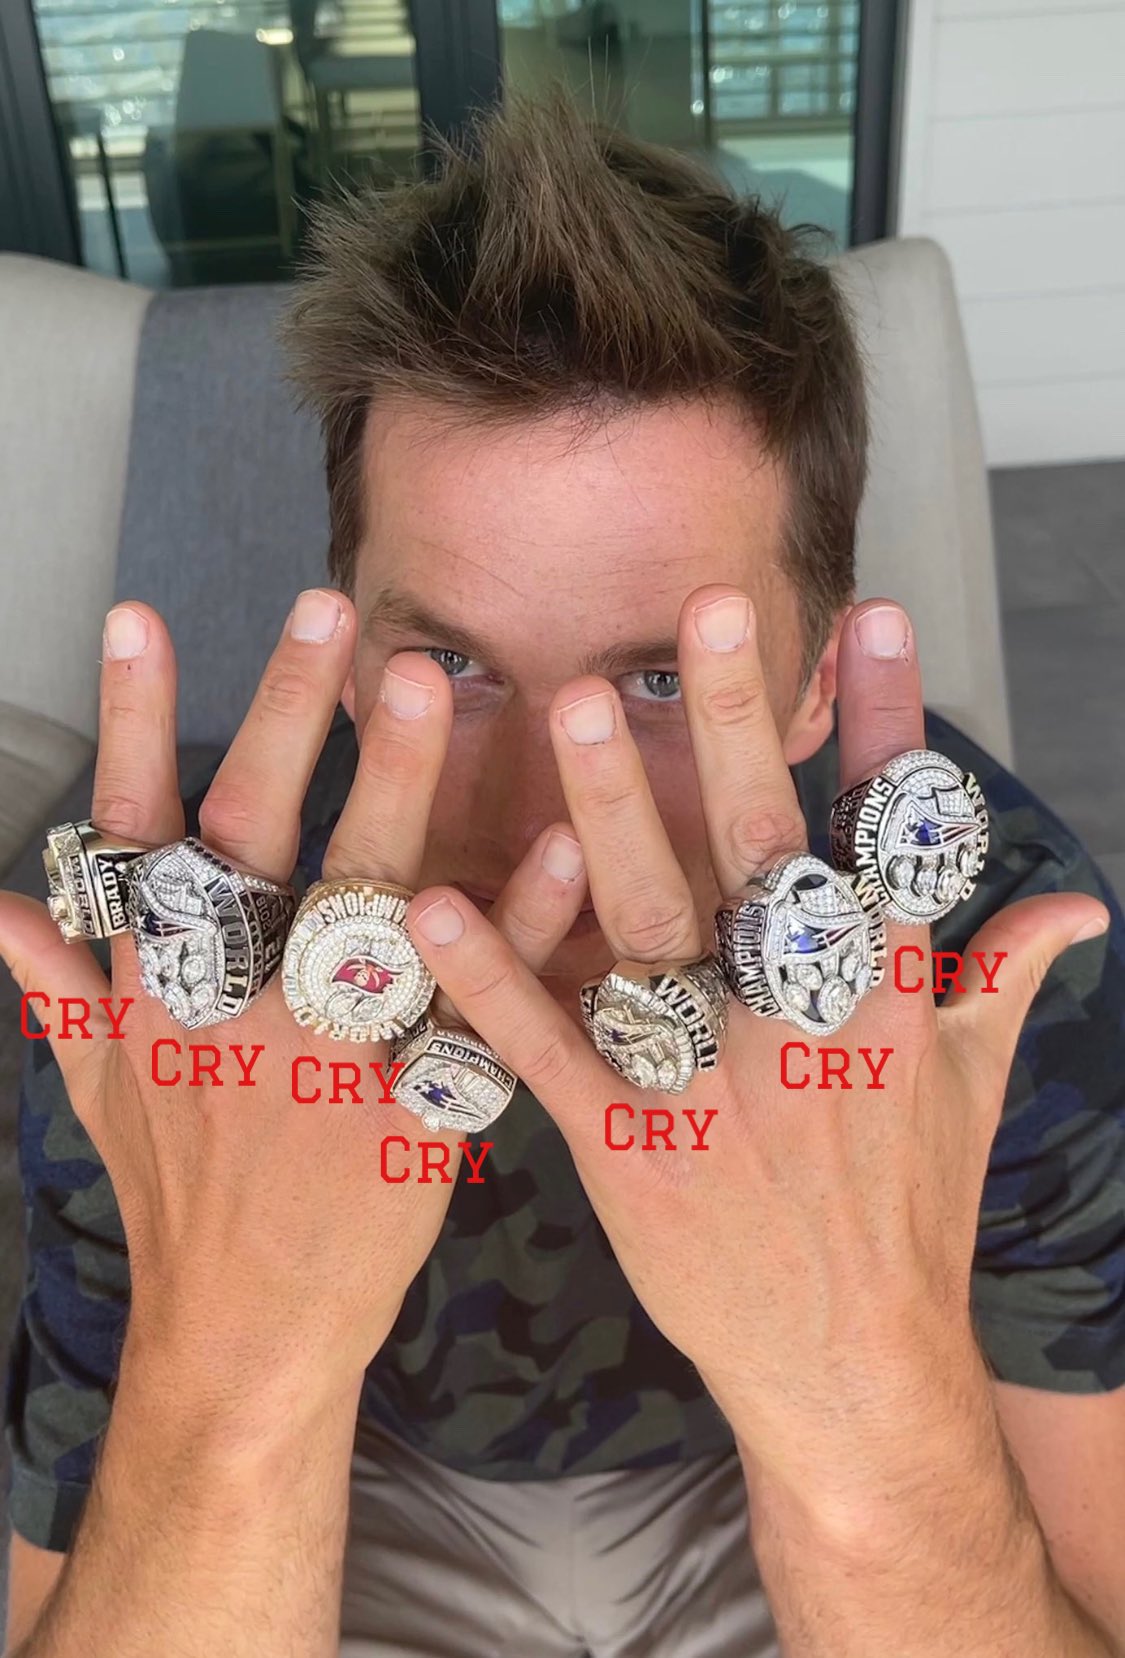 NFL Memes on Twitter: "A breakdown of Tom Brady's ring situation  https://t.co/SqNApycFyc" / Twitter